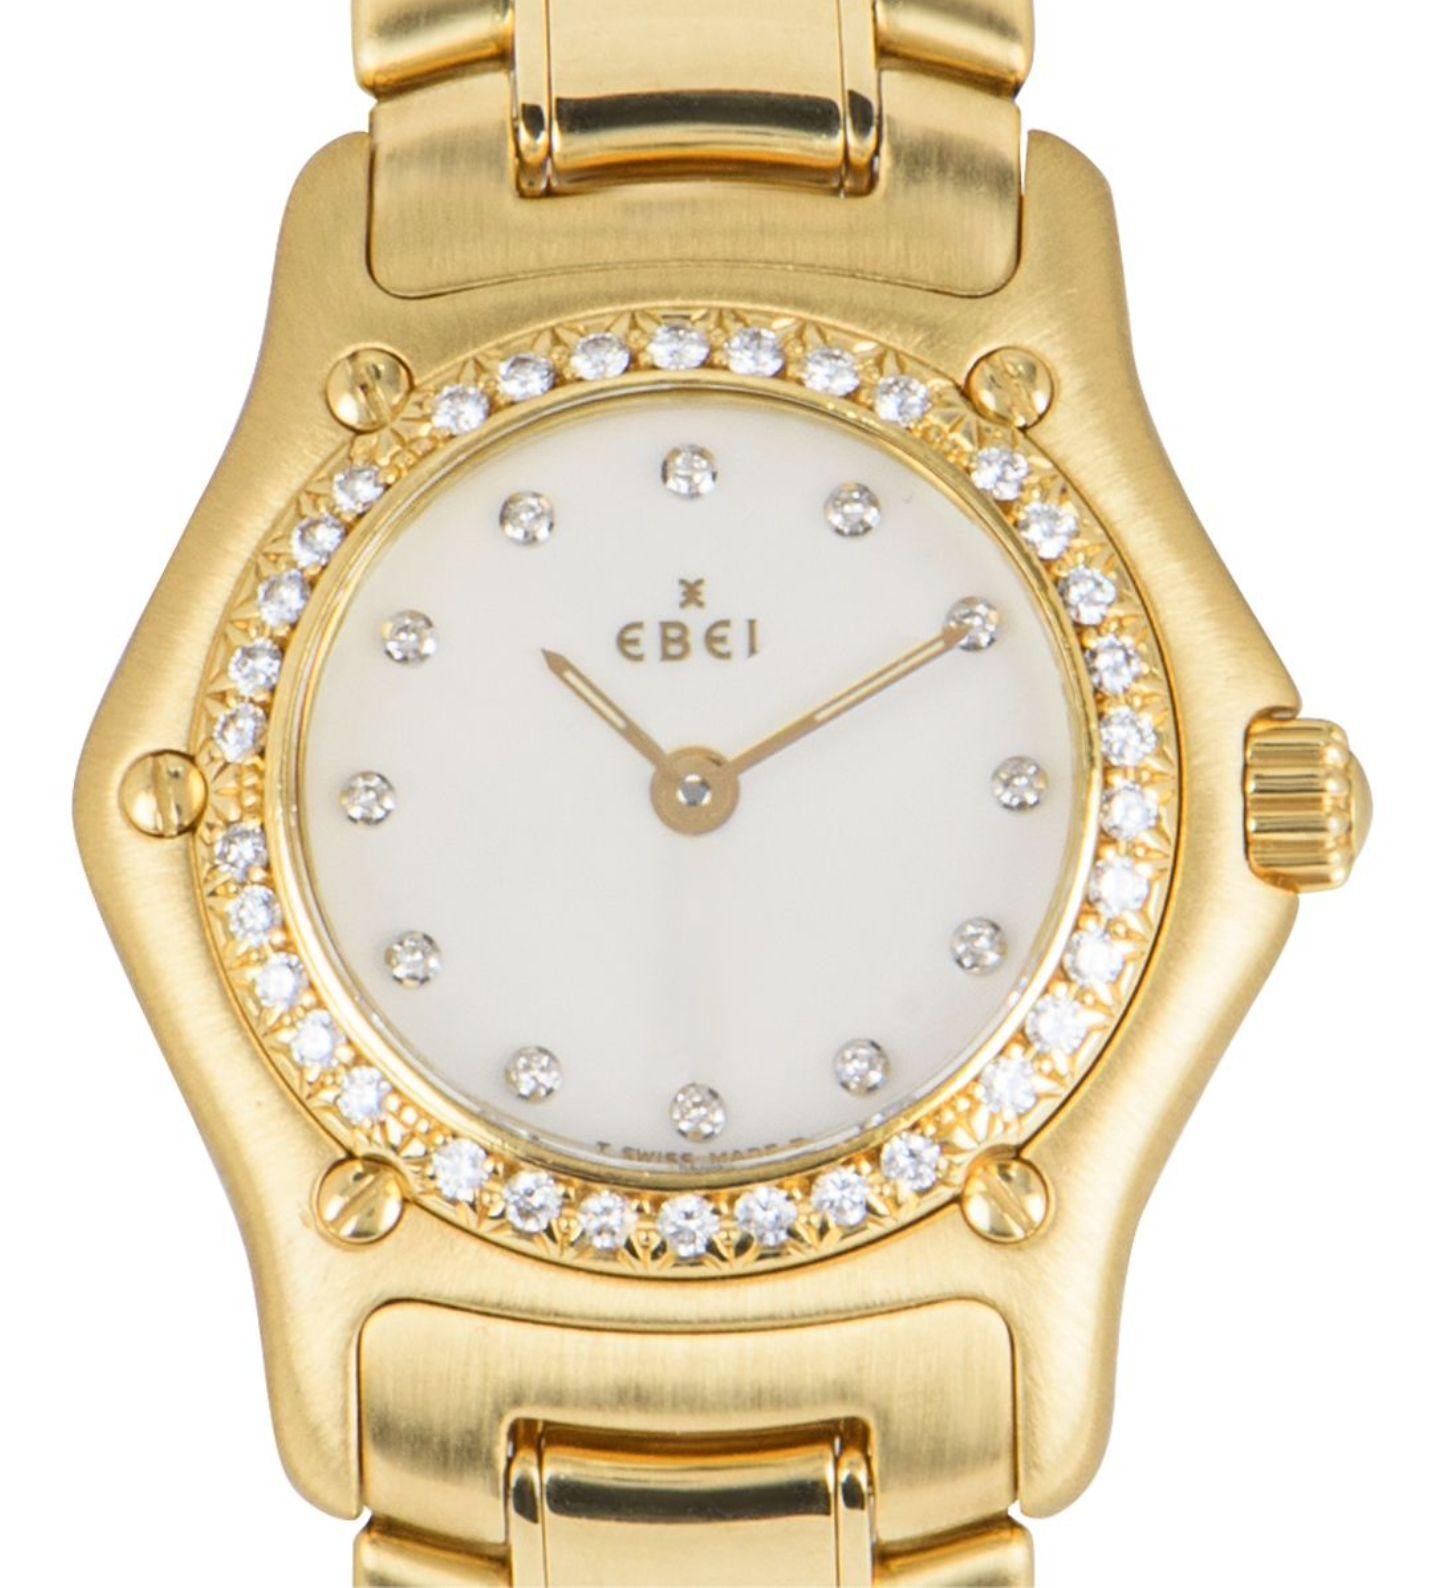 An Ebel 1911 women's wristwatch. 

Made from 18k yellow gold, the watch features a white mother of pearl dial set with applied diamond hour markers, a fixed 18k yellow gold bezel set with 34 round brilliant cut diamonds, an 18k yellow gold bracelet